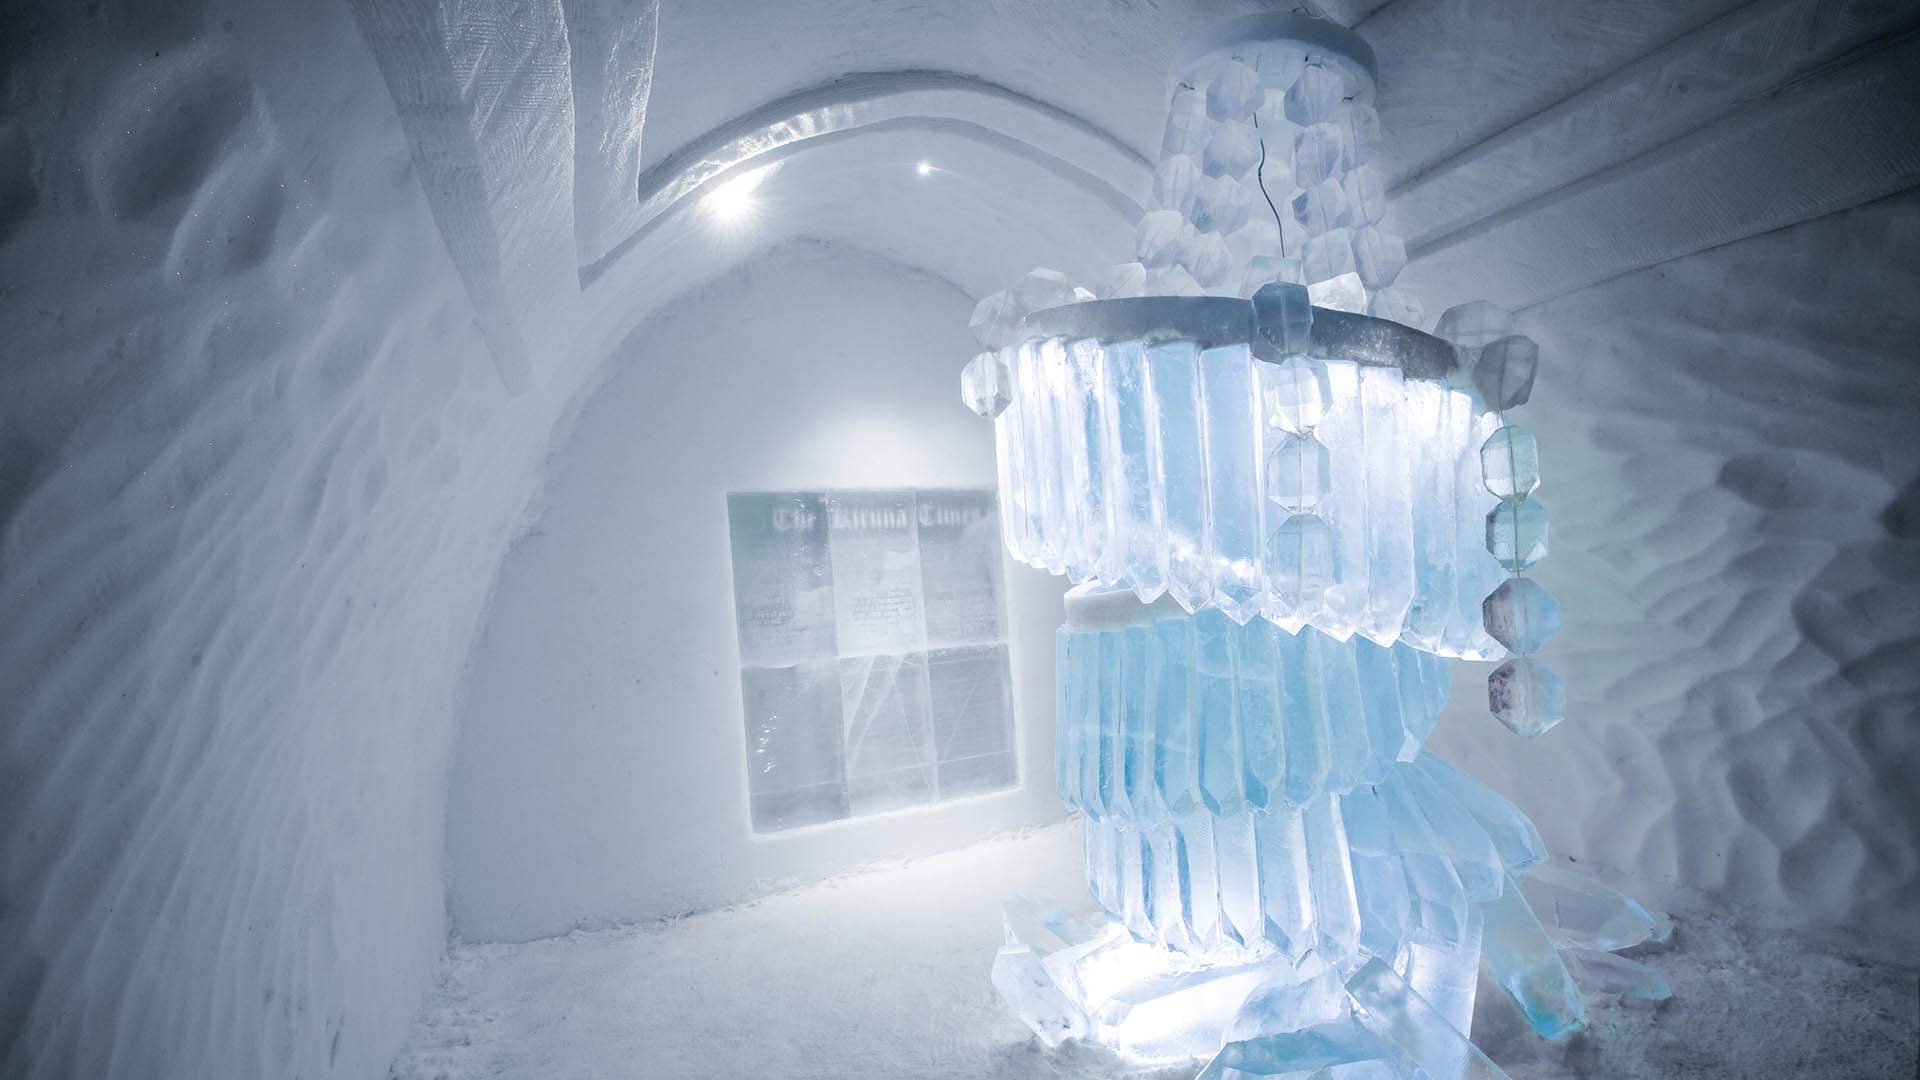 Sweden's Ice Hotel Has Revealed Its Latest Batch of Frosty and Imaginative Artist-Created Rooms